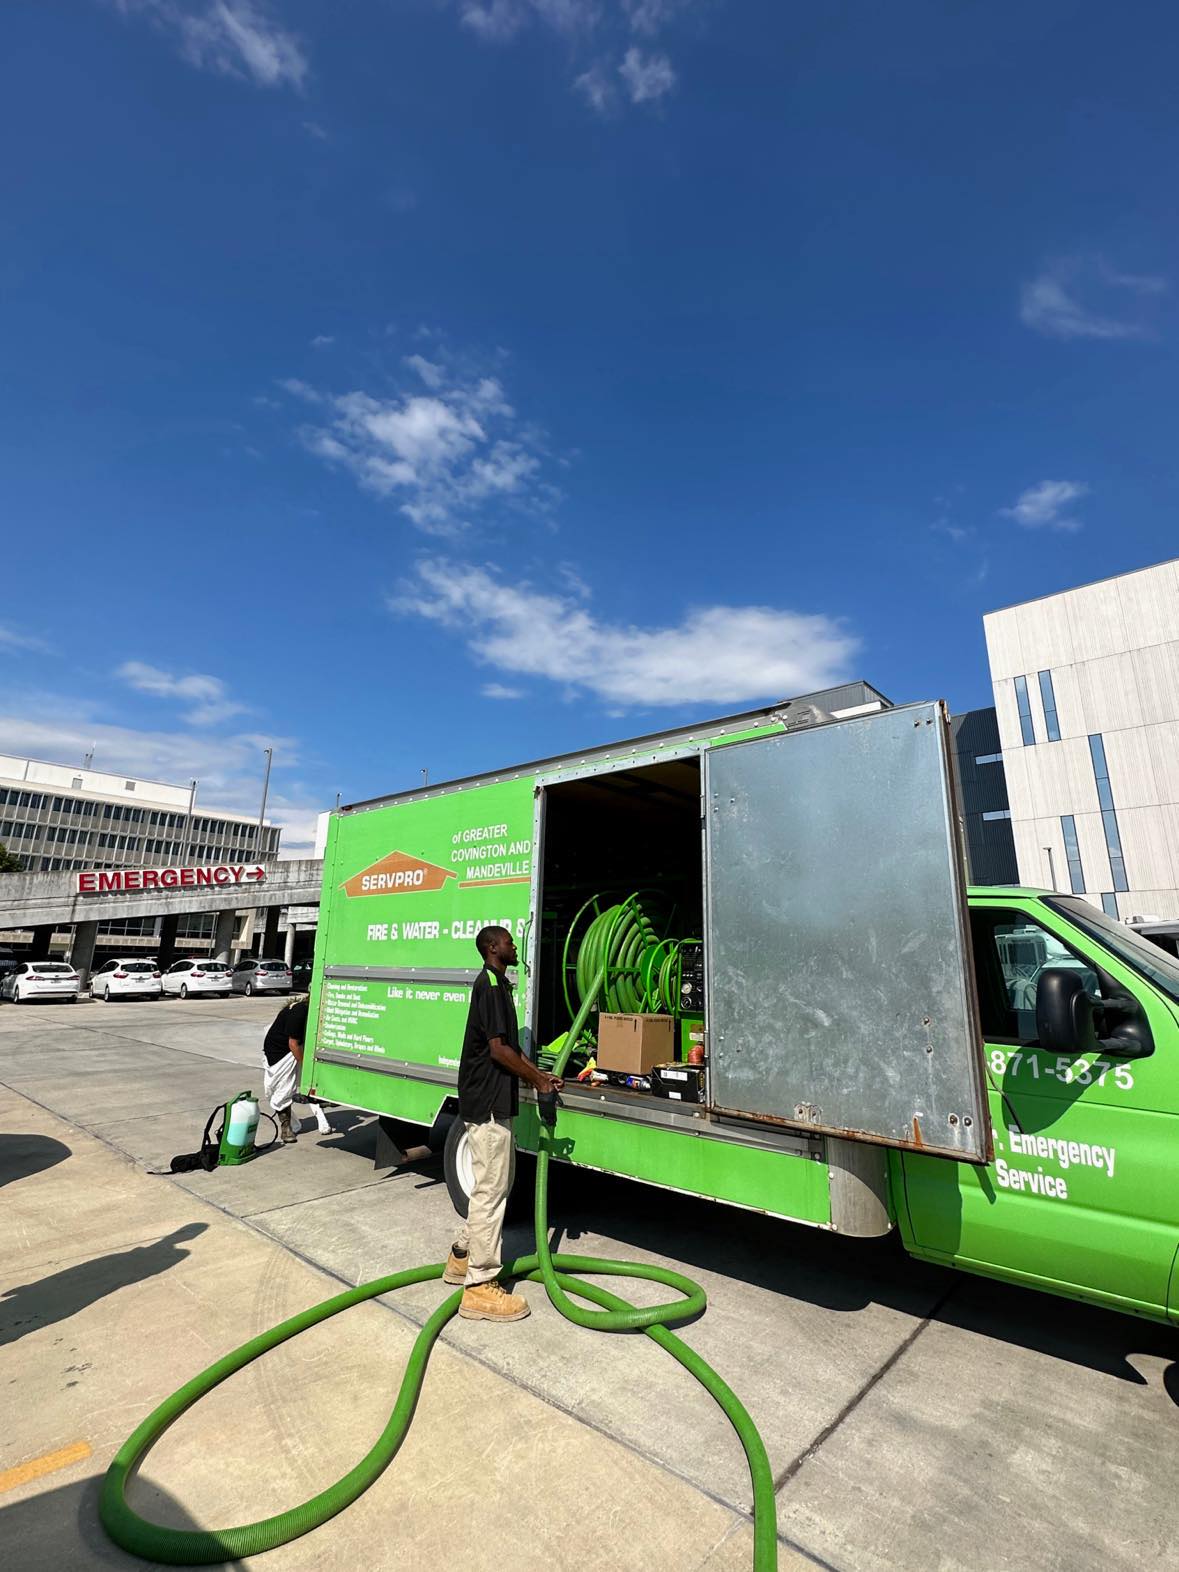 SERVPRO green water mitigation truck removed sewage overflow at hospital